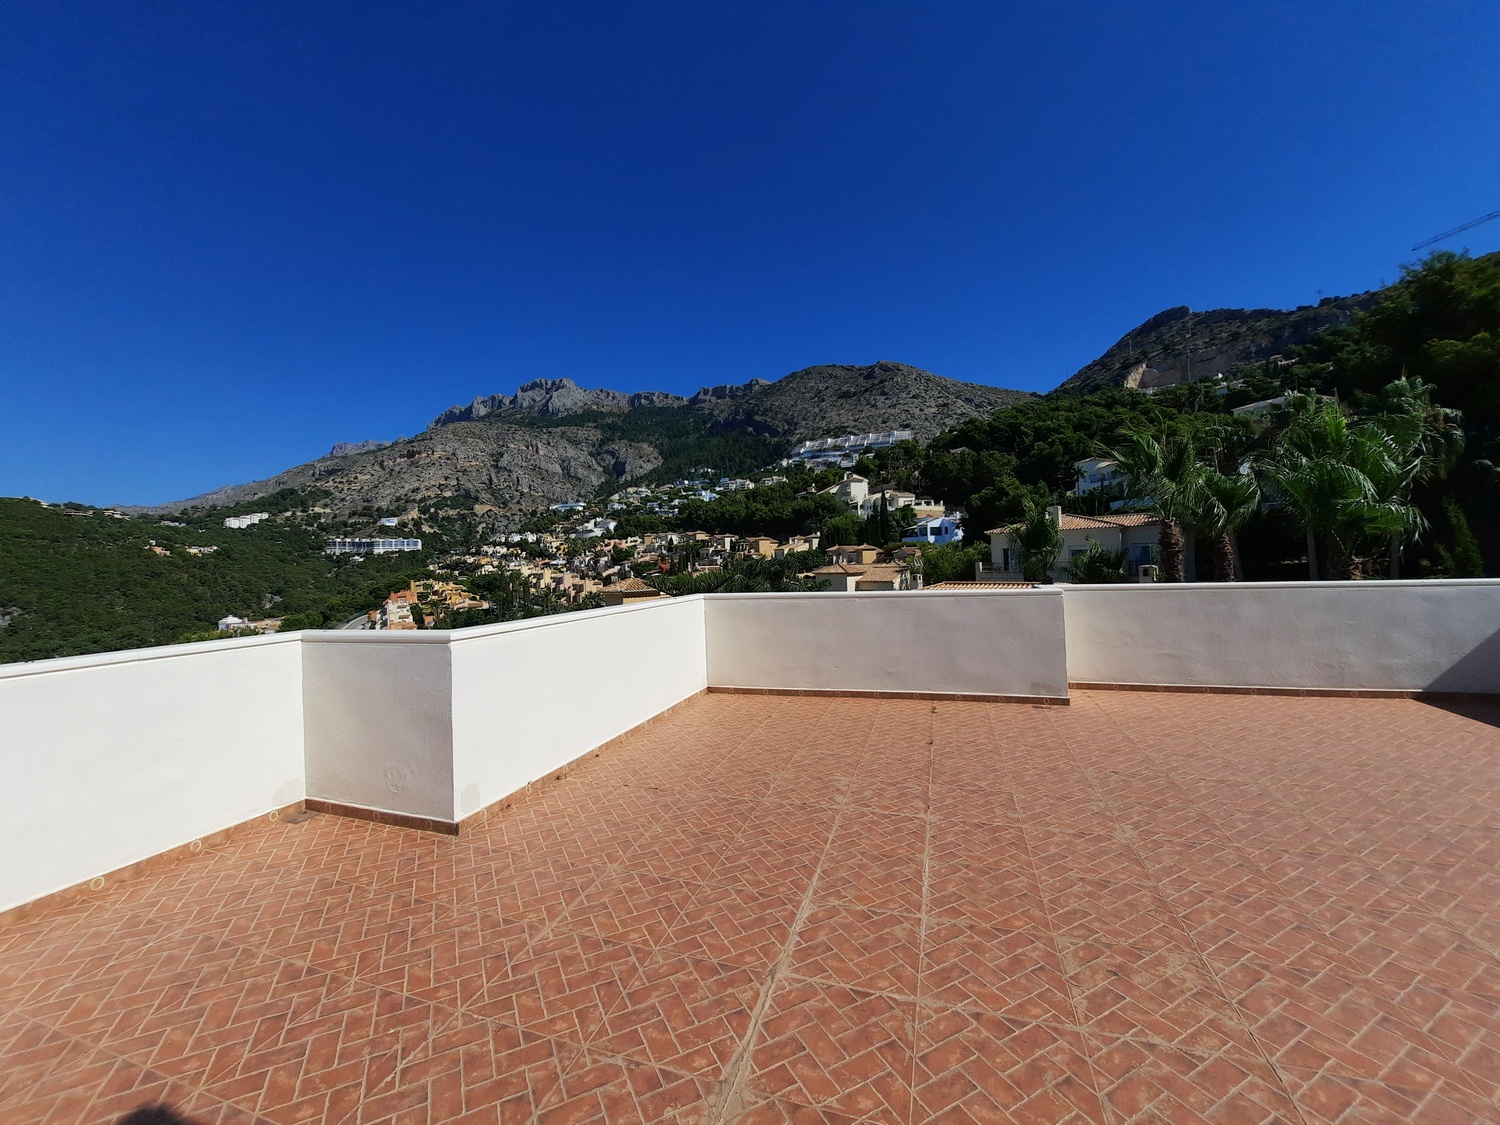 Mediterranean style villa with panoramic views in Altea